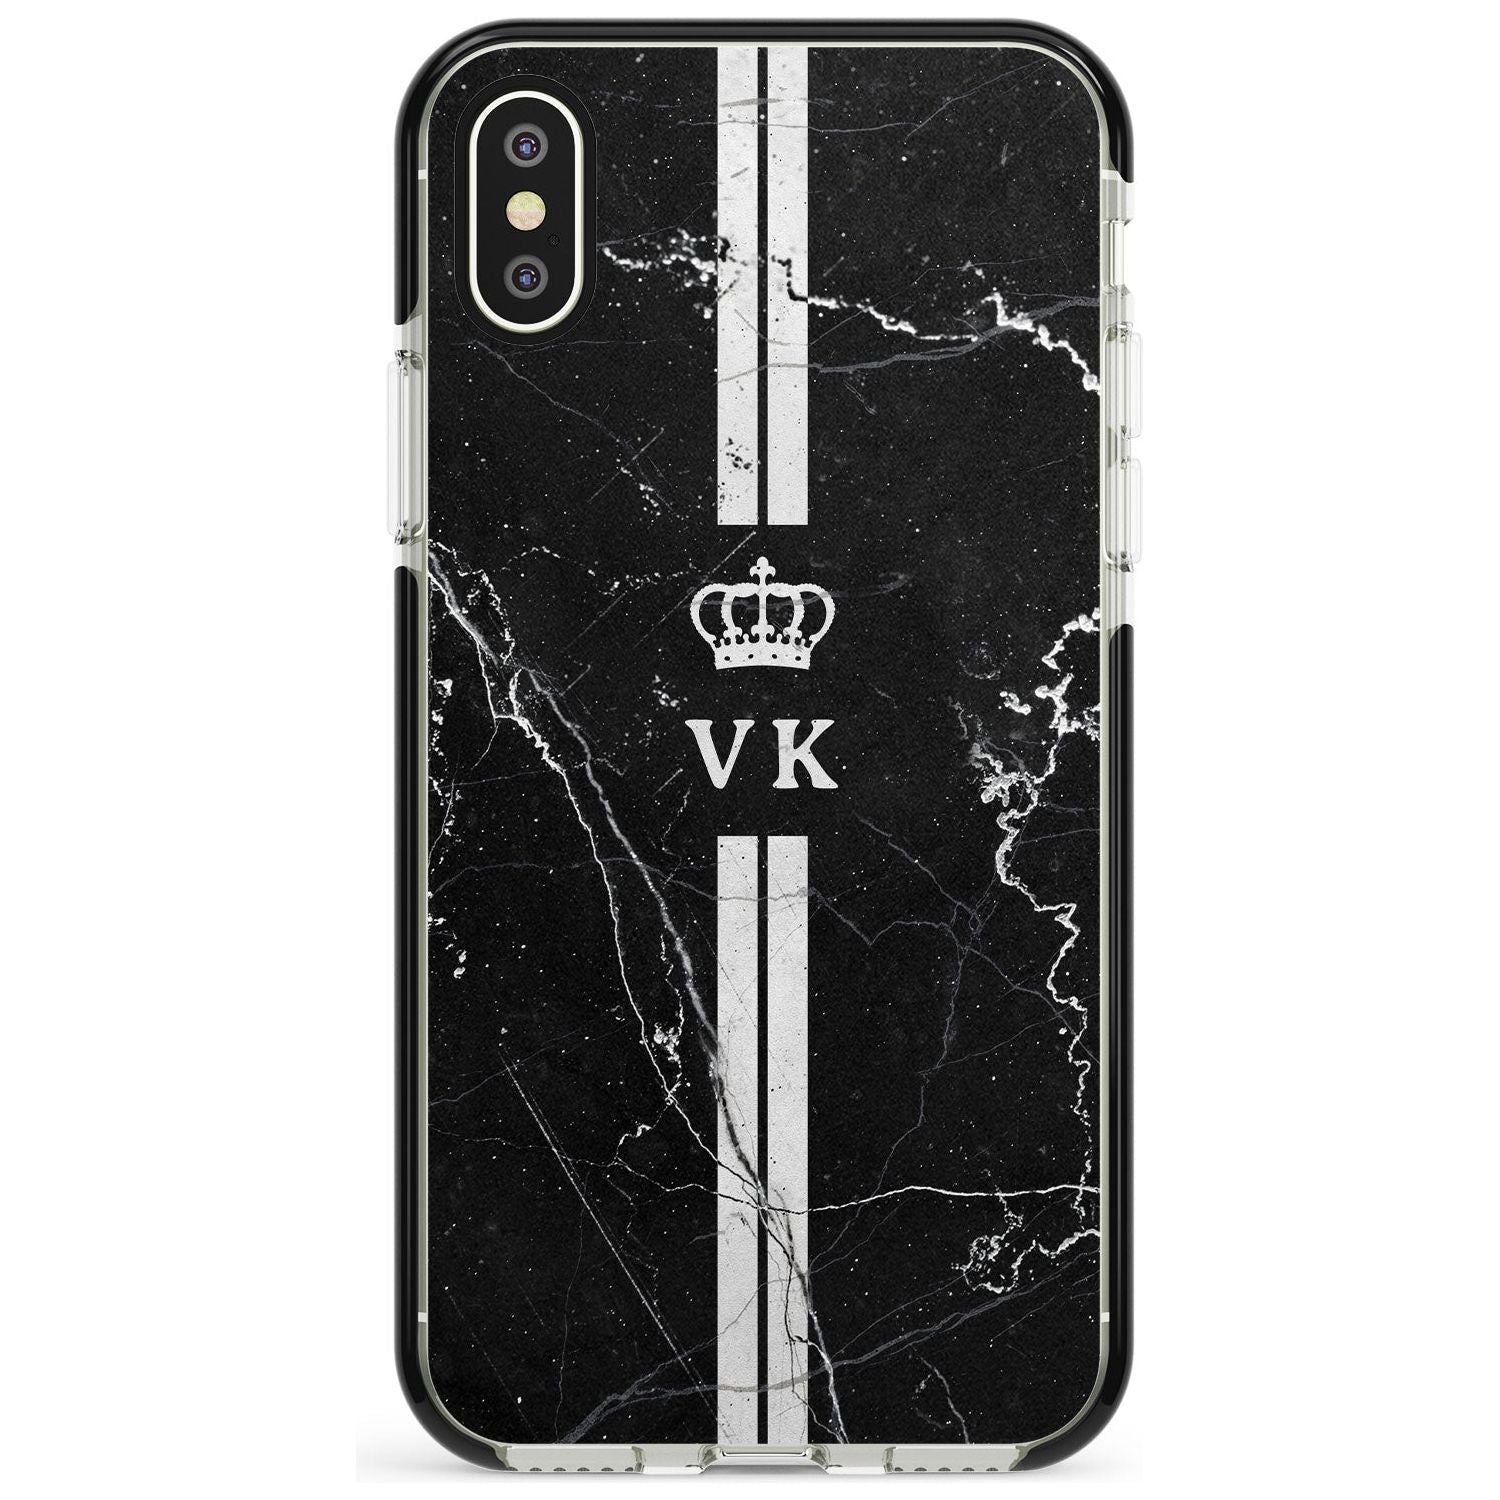 Stripes + Initials with Crown on Black Marble Black Impact Phone Case for iPhone X XS Max XR